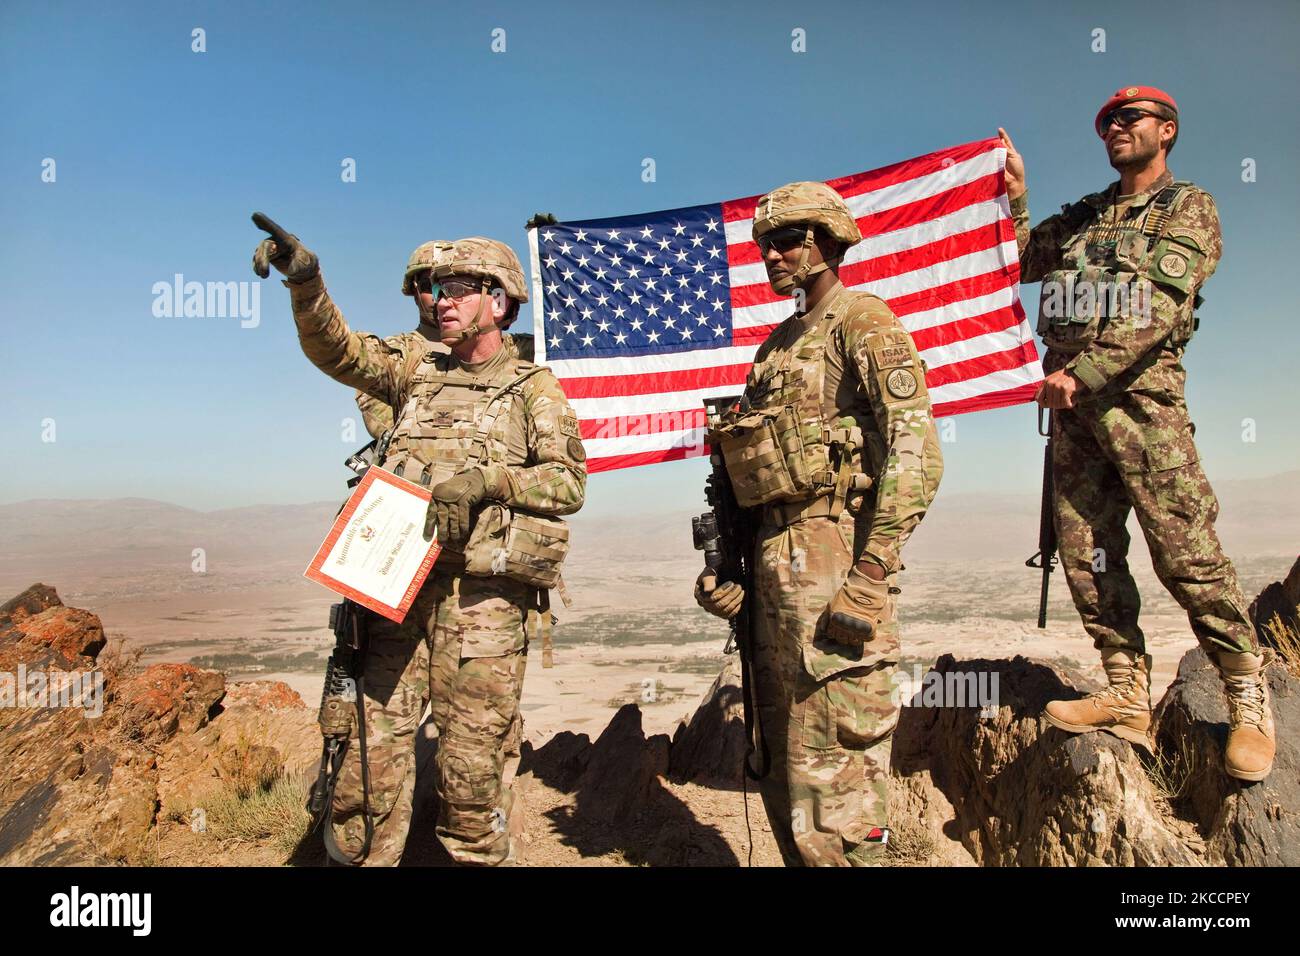 U.S. Army soldiers hold the American flag atop Pride Rock mountain in Afghantistan. Stock Photo